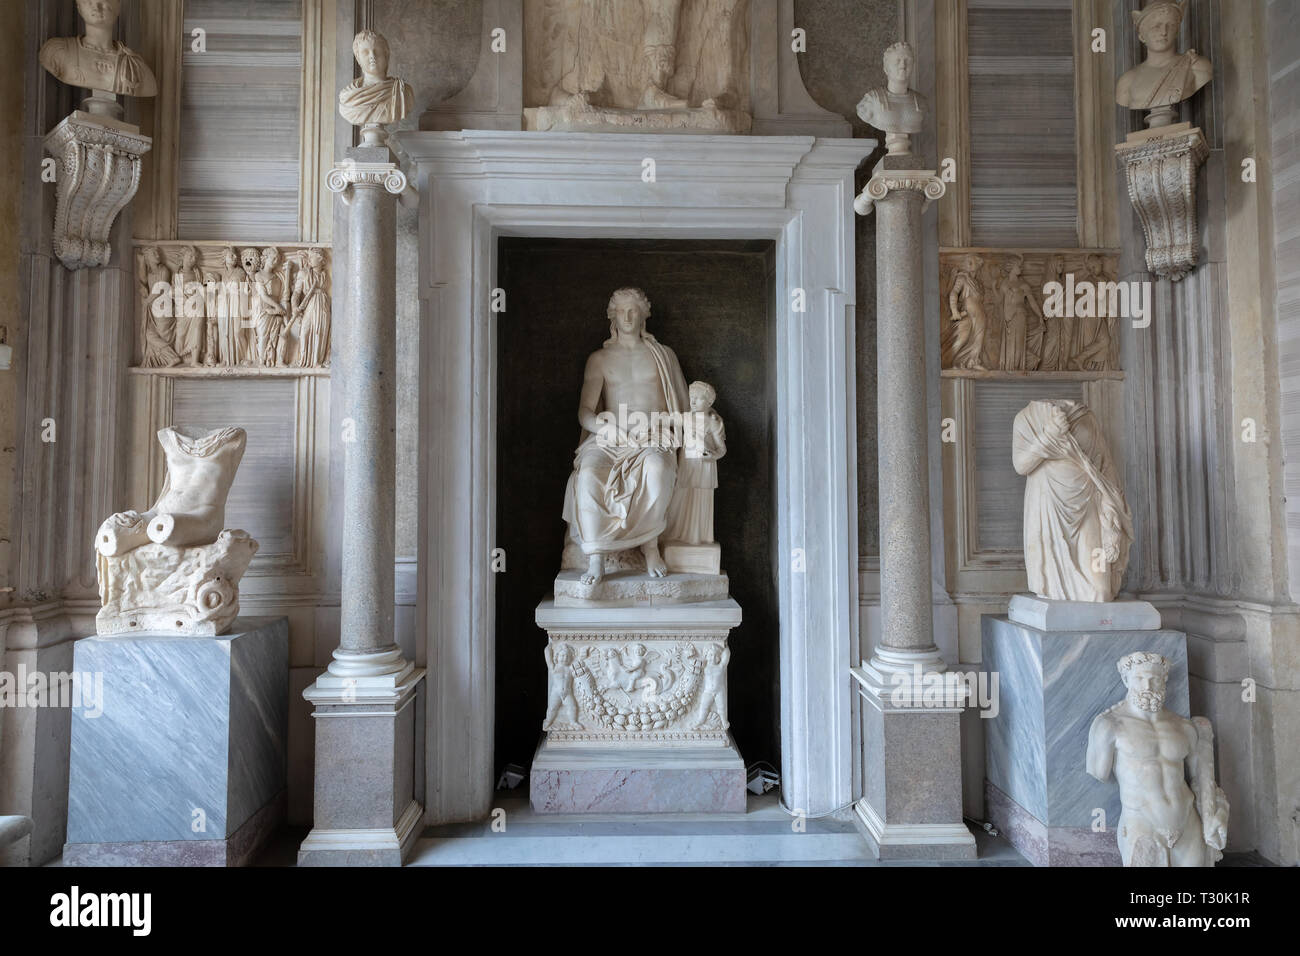 Rome, Italy - June 22, 2018: Baroque marble sculptural group by Italian artist in Galleria Borghese of Villa Borghese Stock Photo